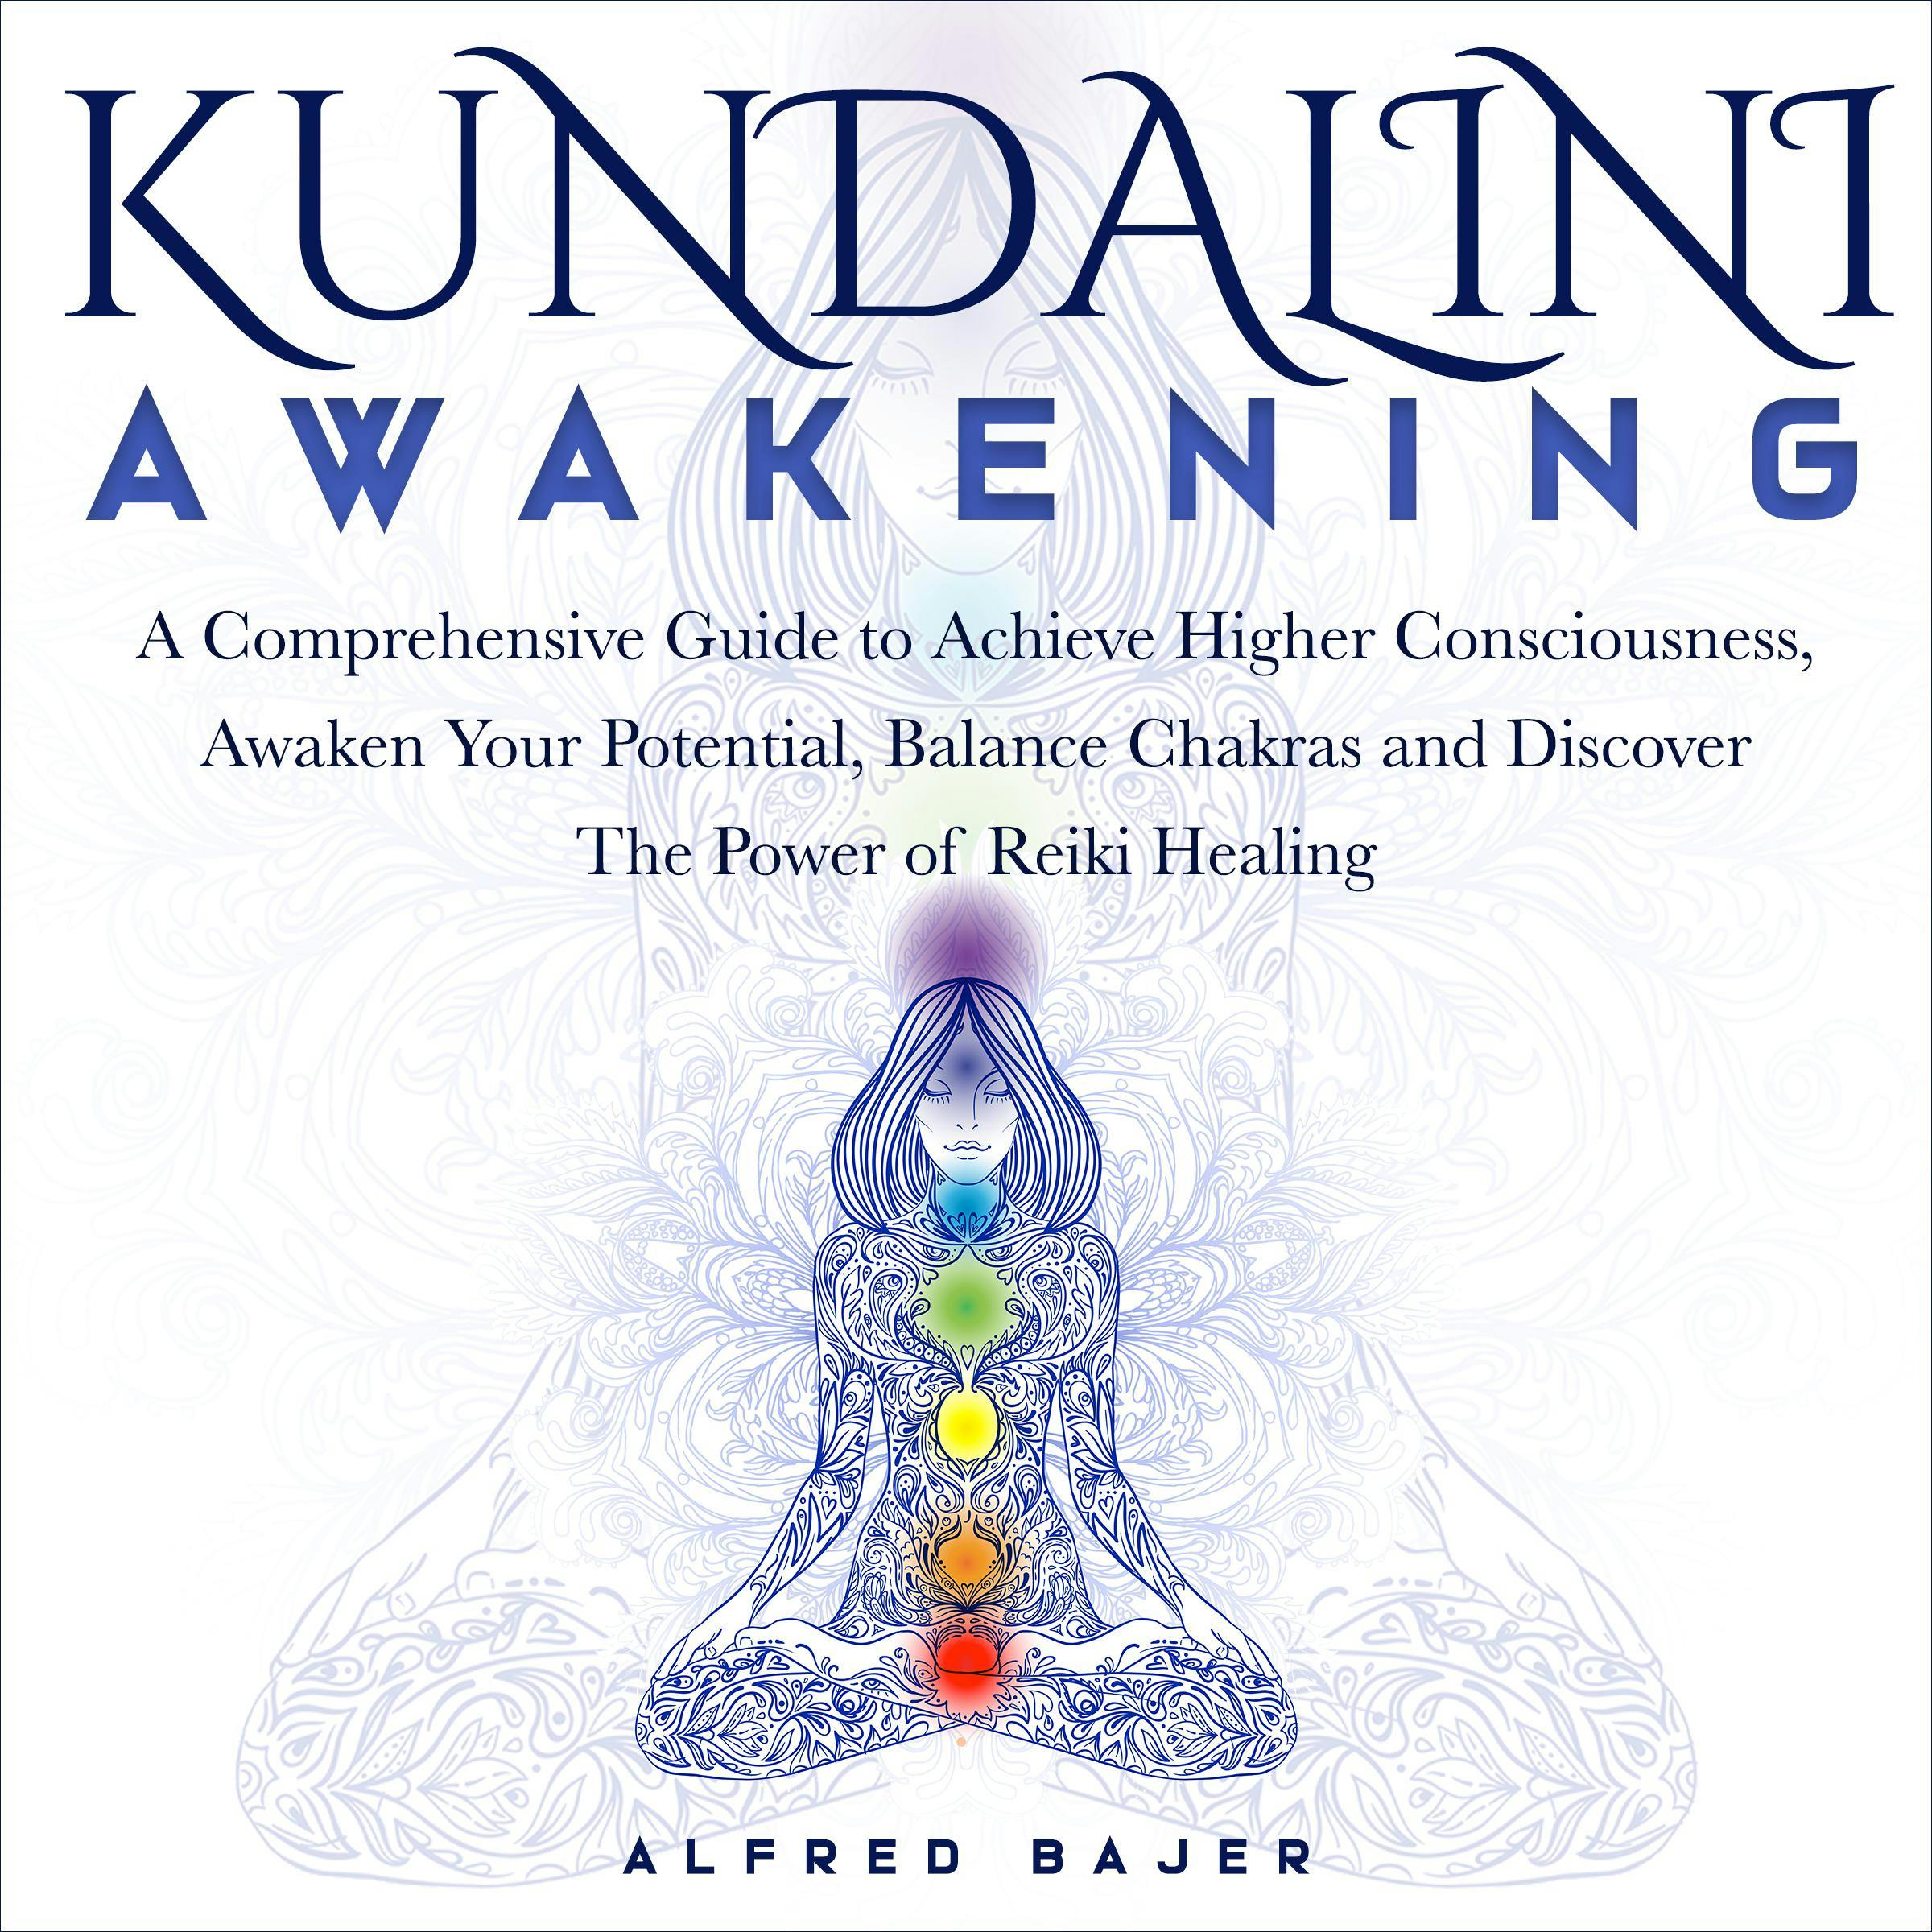 Kundalini Awakening: A Comprehensive Guide to Achieve Higher Consciousness, Awaken Your Potential, Balance Chakras and Discover the Power of Reiki Healing - Alfred Bajer